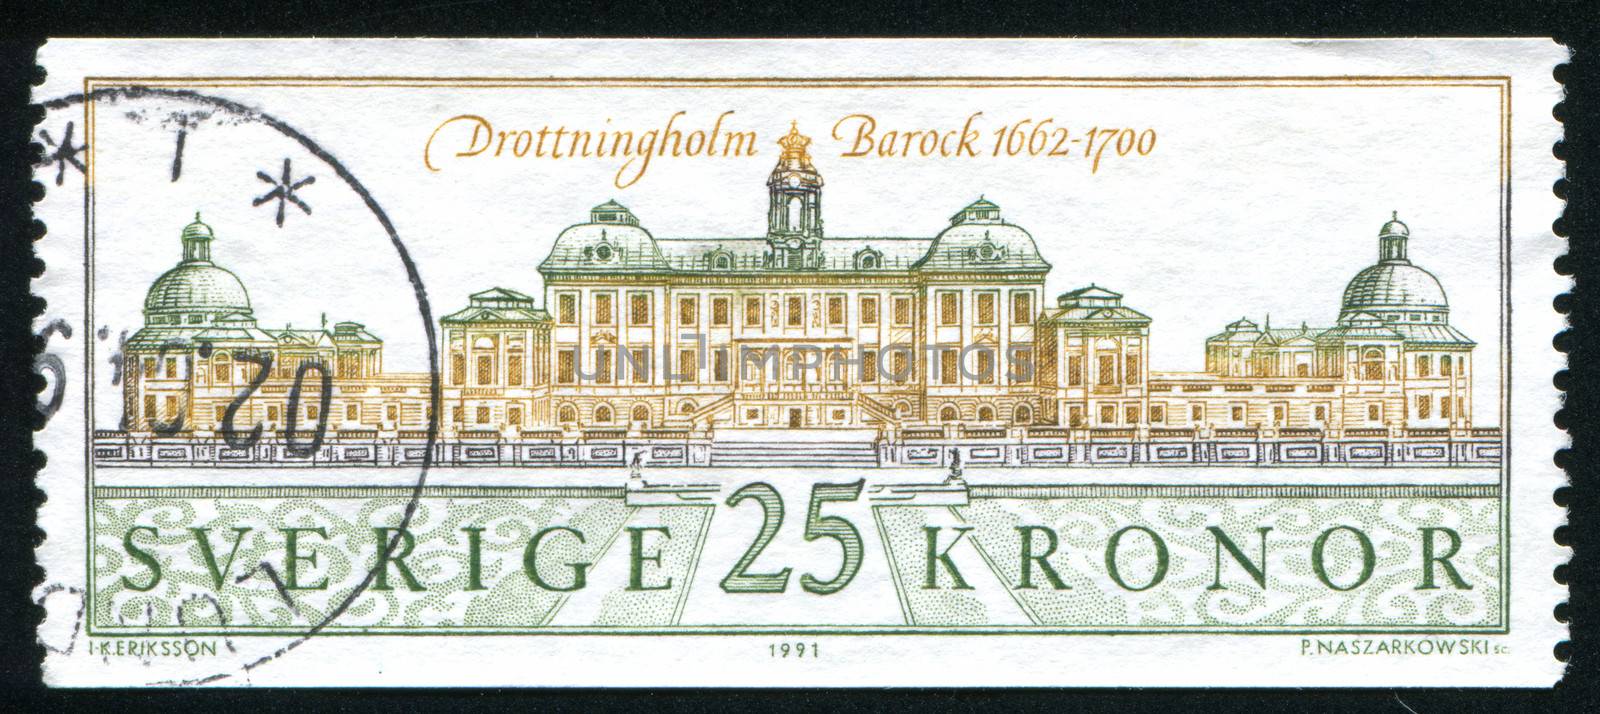 SWEDEN - CIRCA 1991: stamp printed by Sweden, shows Drottningholm Palace, circa 1991